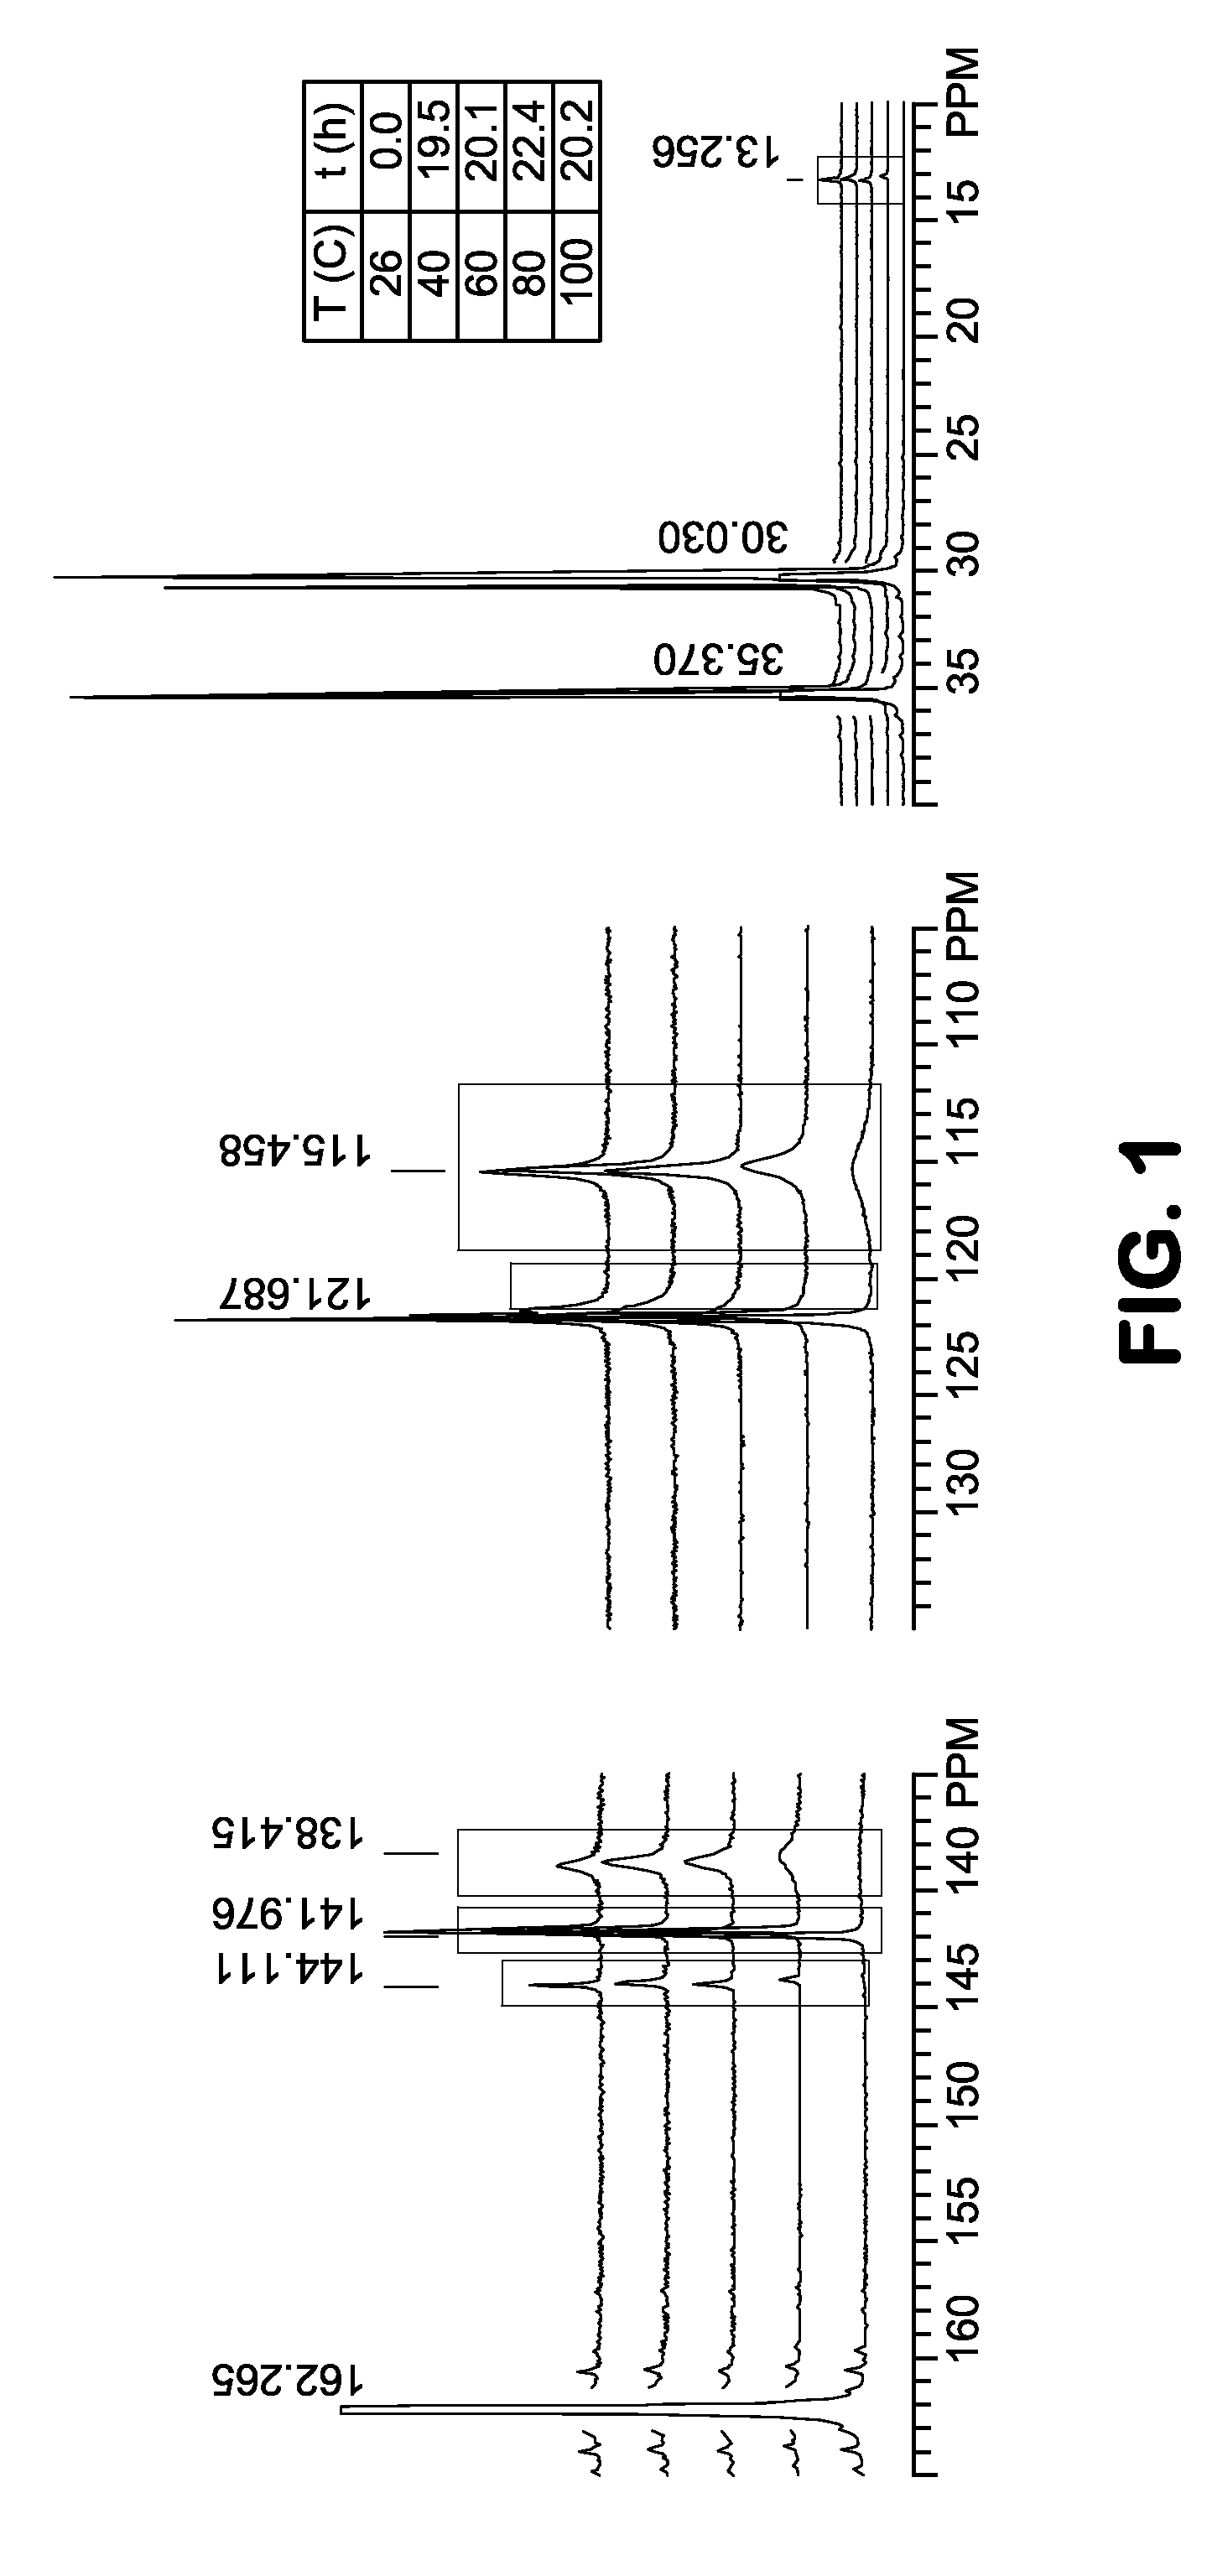 EMM19star NOVEL ZEOLITIC IMIDAZOLATE FRAMEWORK MATERIAL, METHODS FOR MAKING SAME, AND USES THEREOF